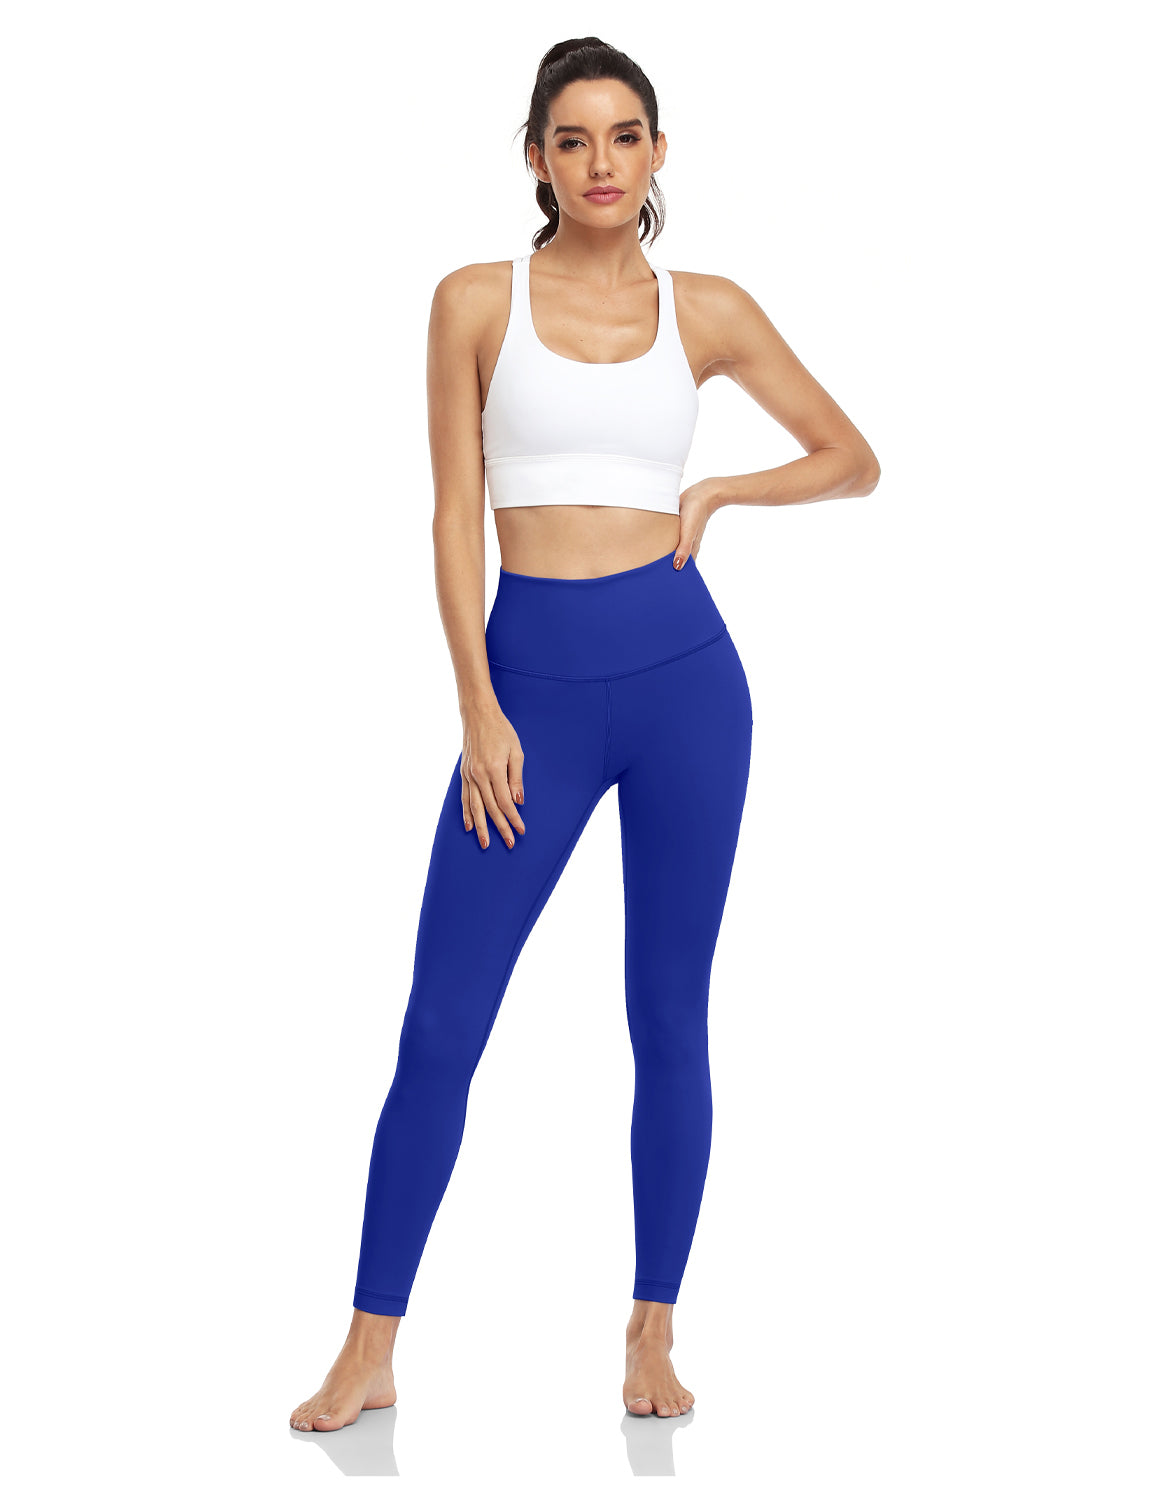  HeyNuts Essential High Waisted Yoga Leggings For Tall Women,  Buttery Soft Full Length Workout Pants 28 Diamond Dye Dazzling Blue XL